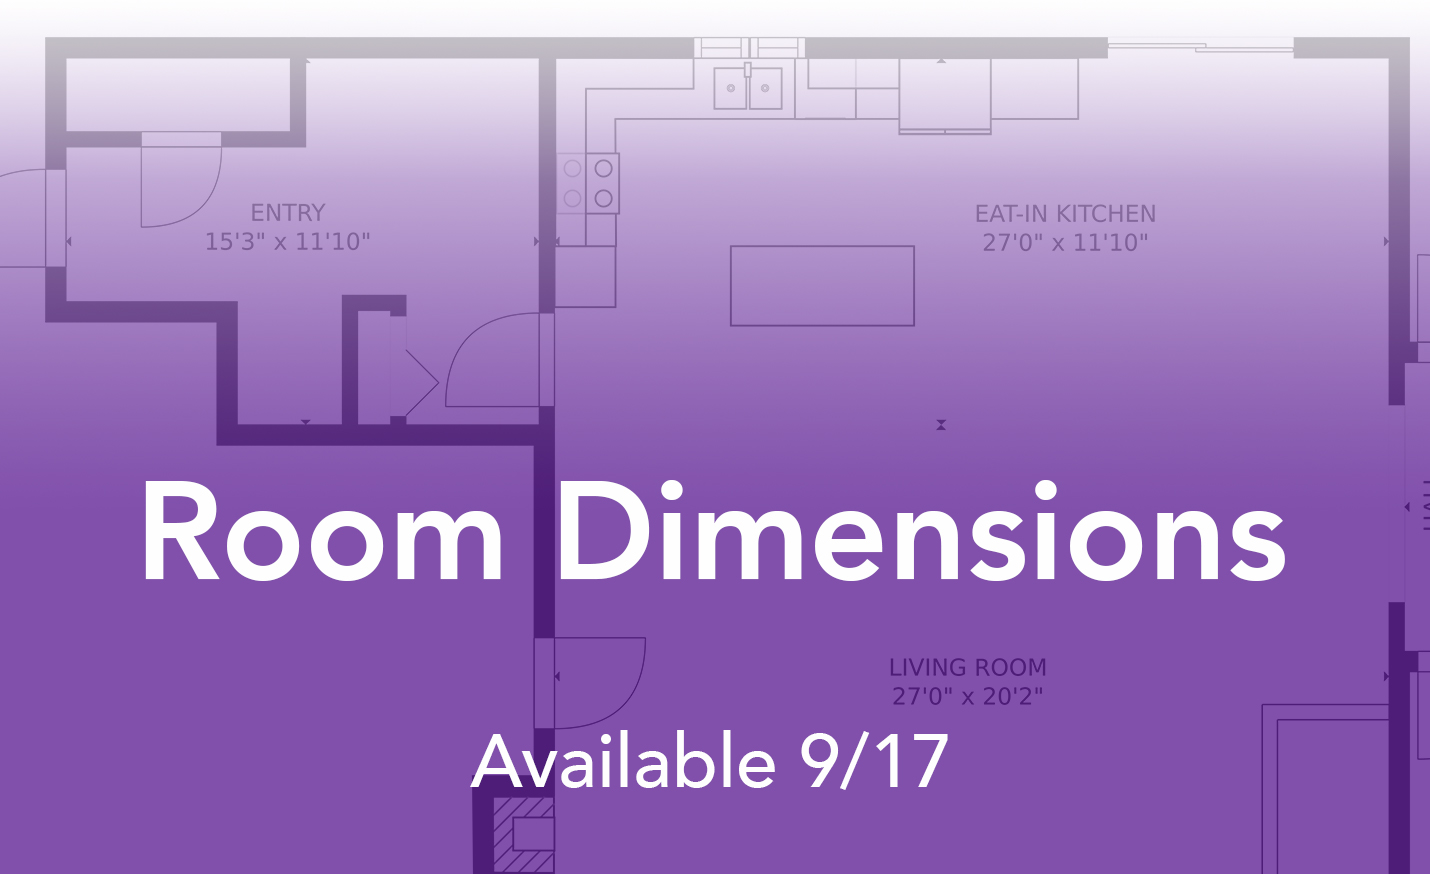 Room Dimensions Coming